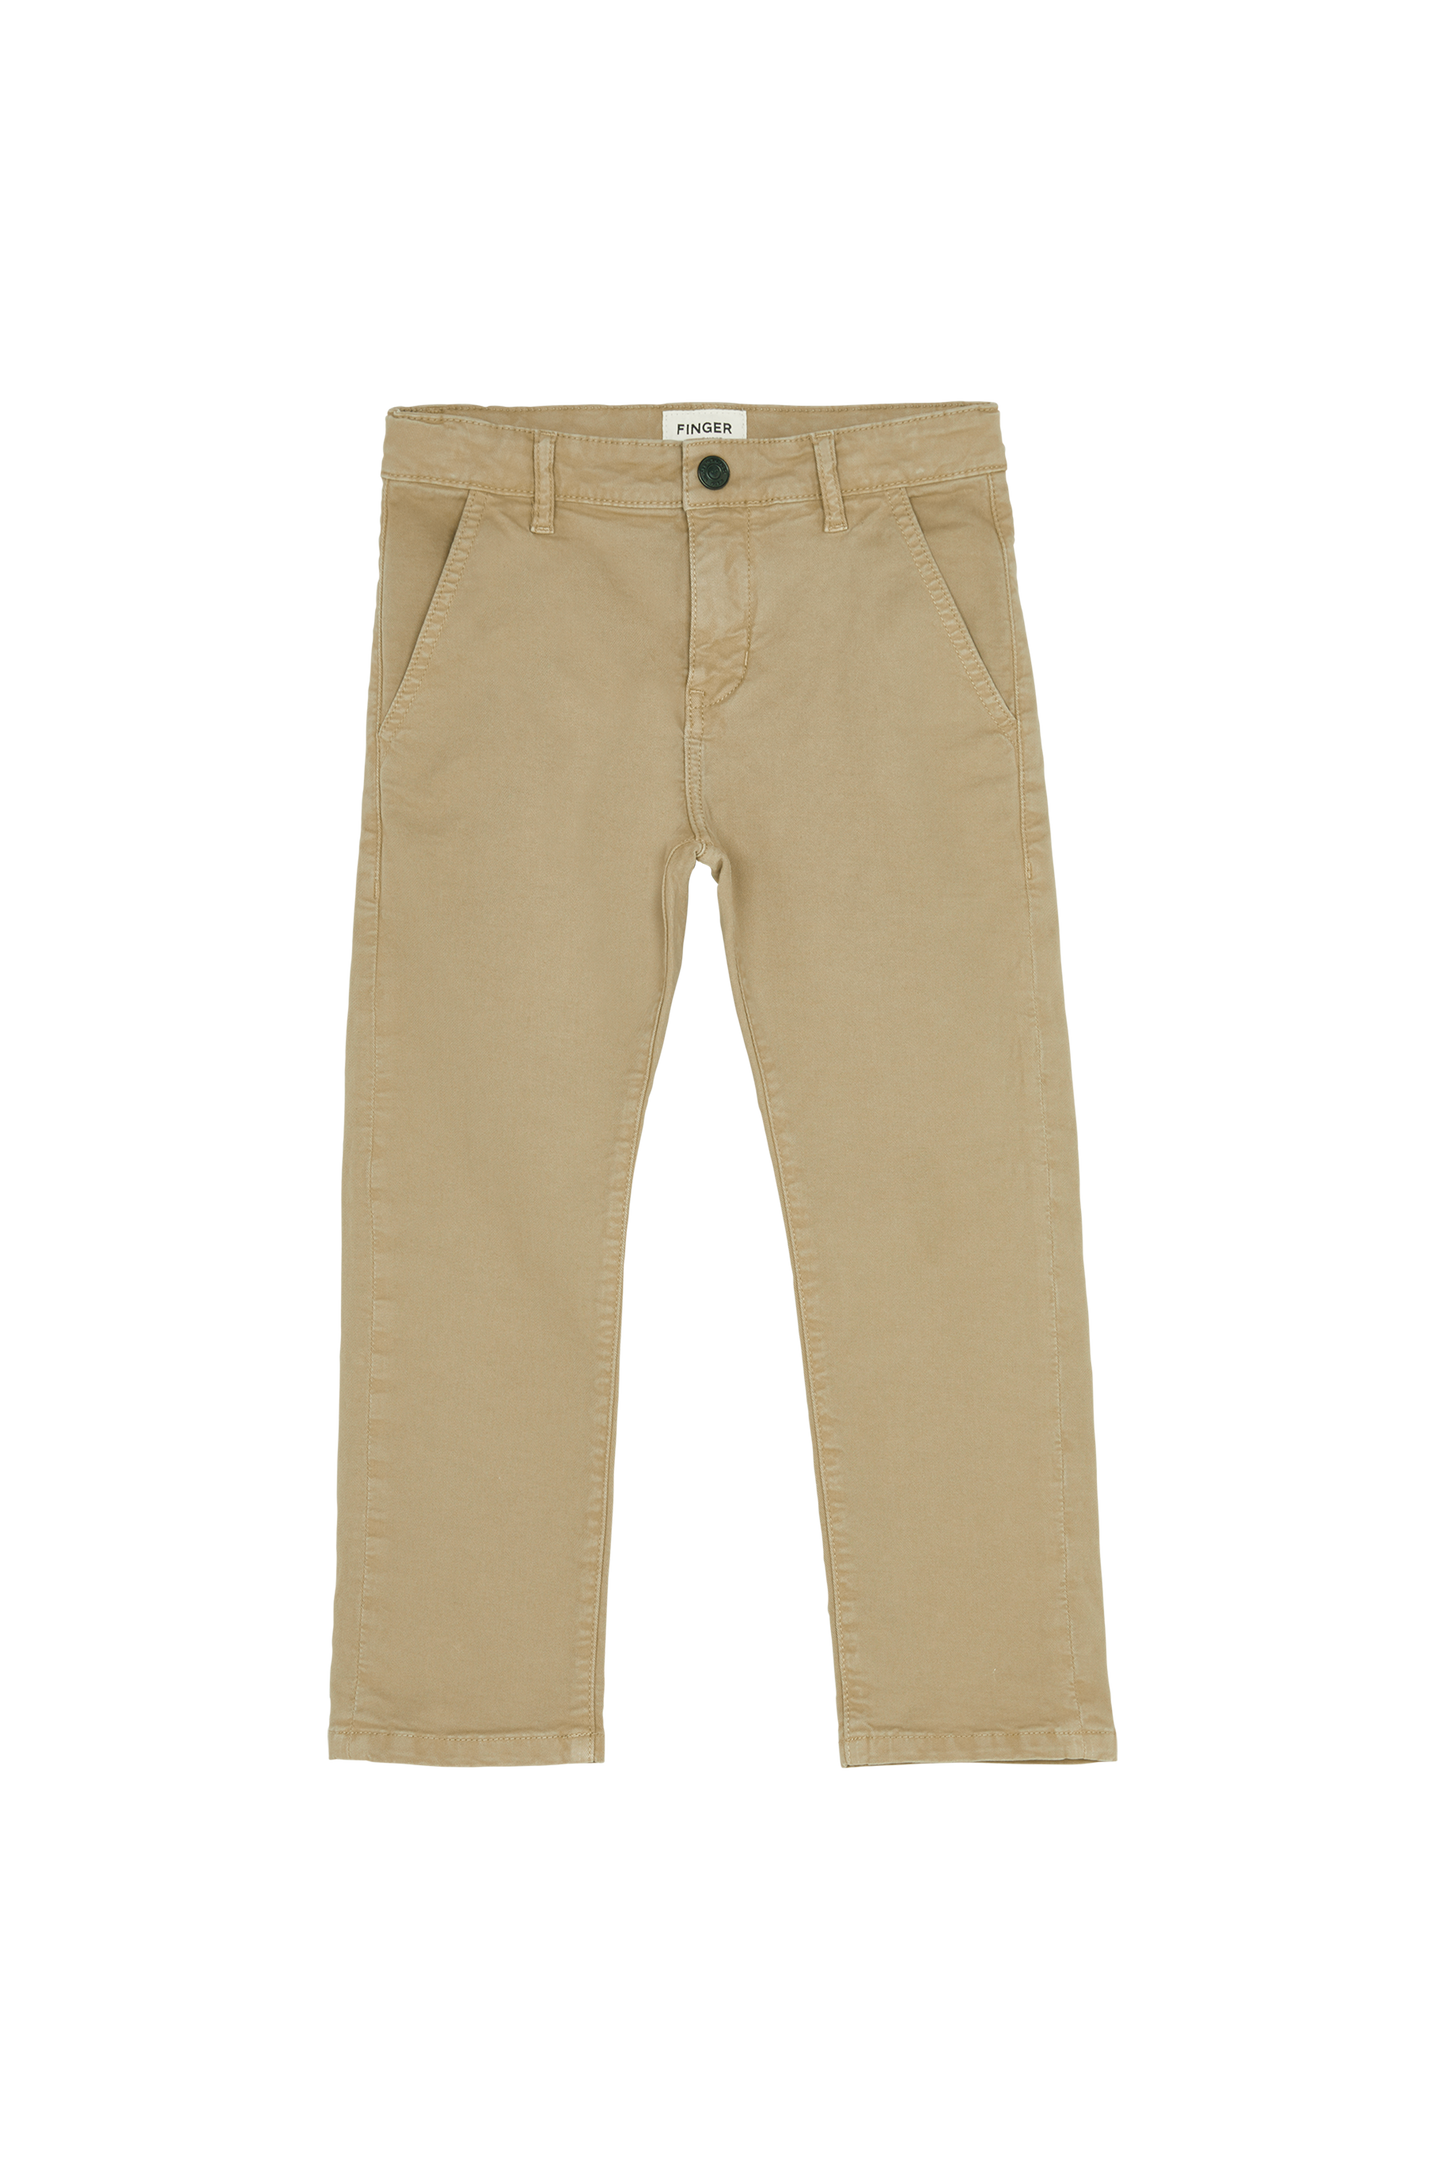 PORTY Linen - Chino Fit Pants